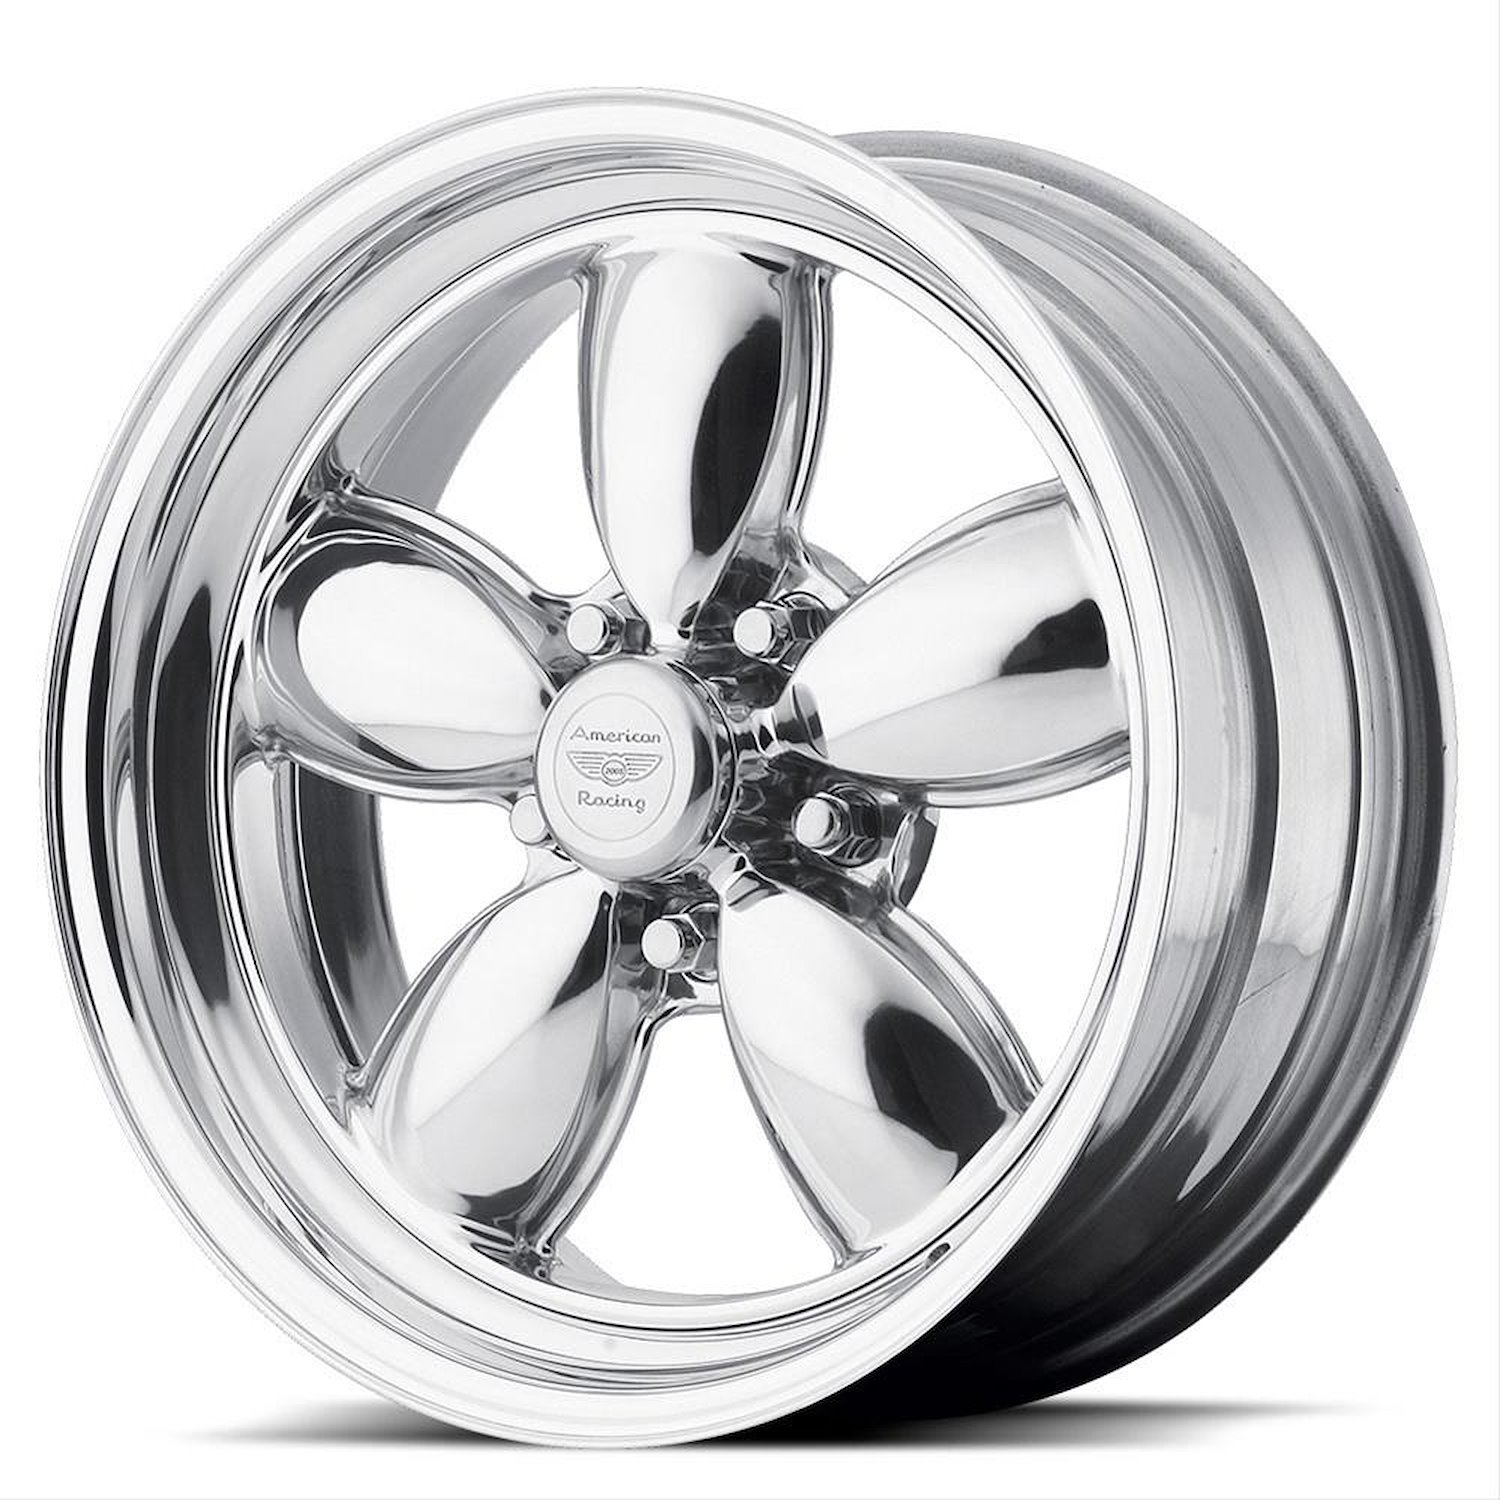 AMERICAN RACING CLASSIC 200S TWO-PIECE POLISHED 15 x 7 5X5.0 -6 3.76